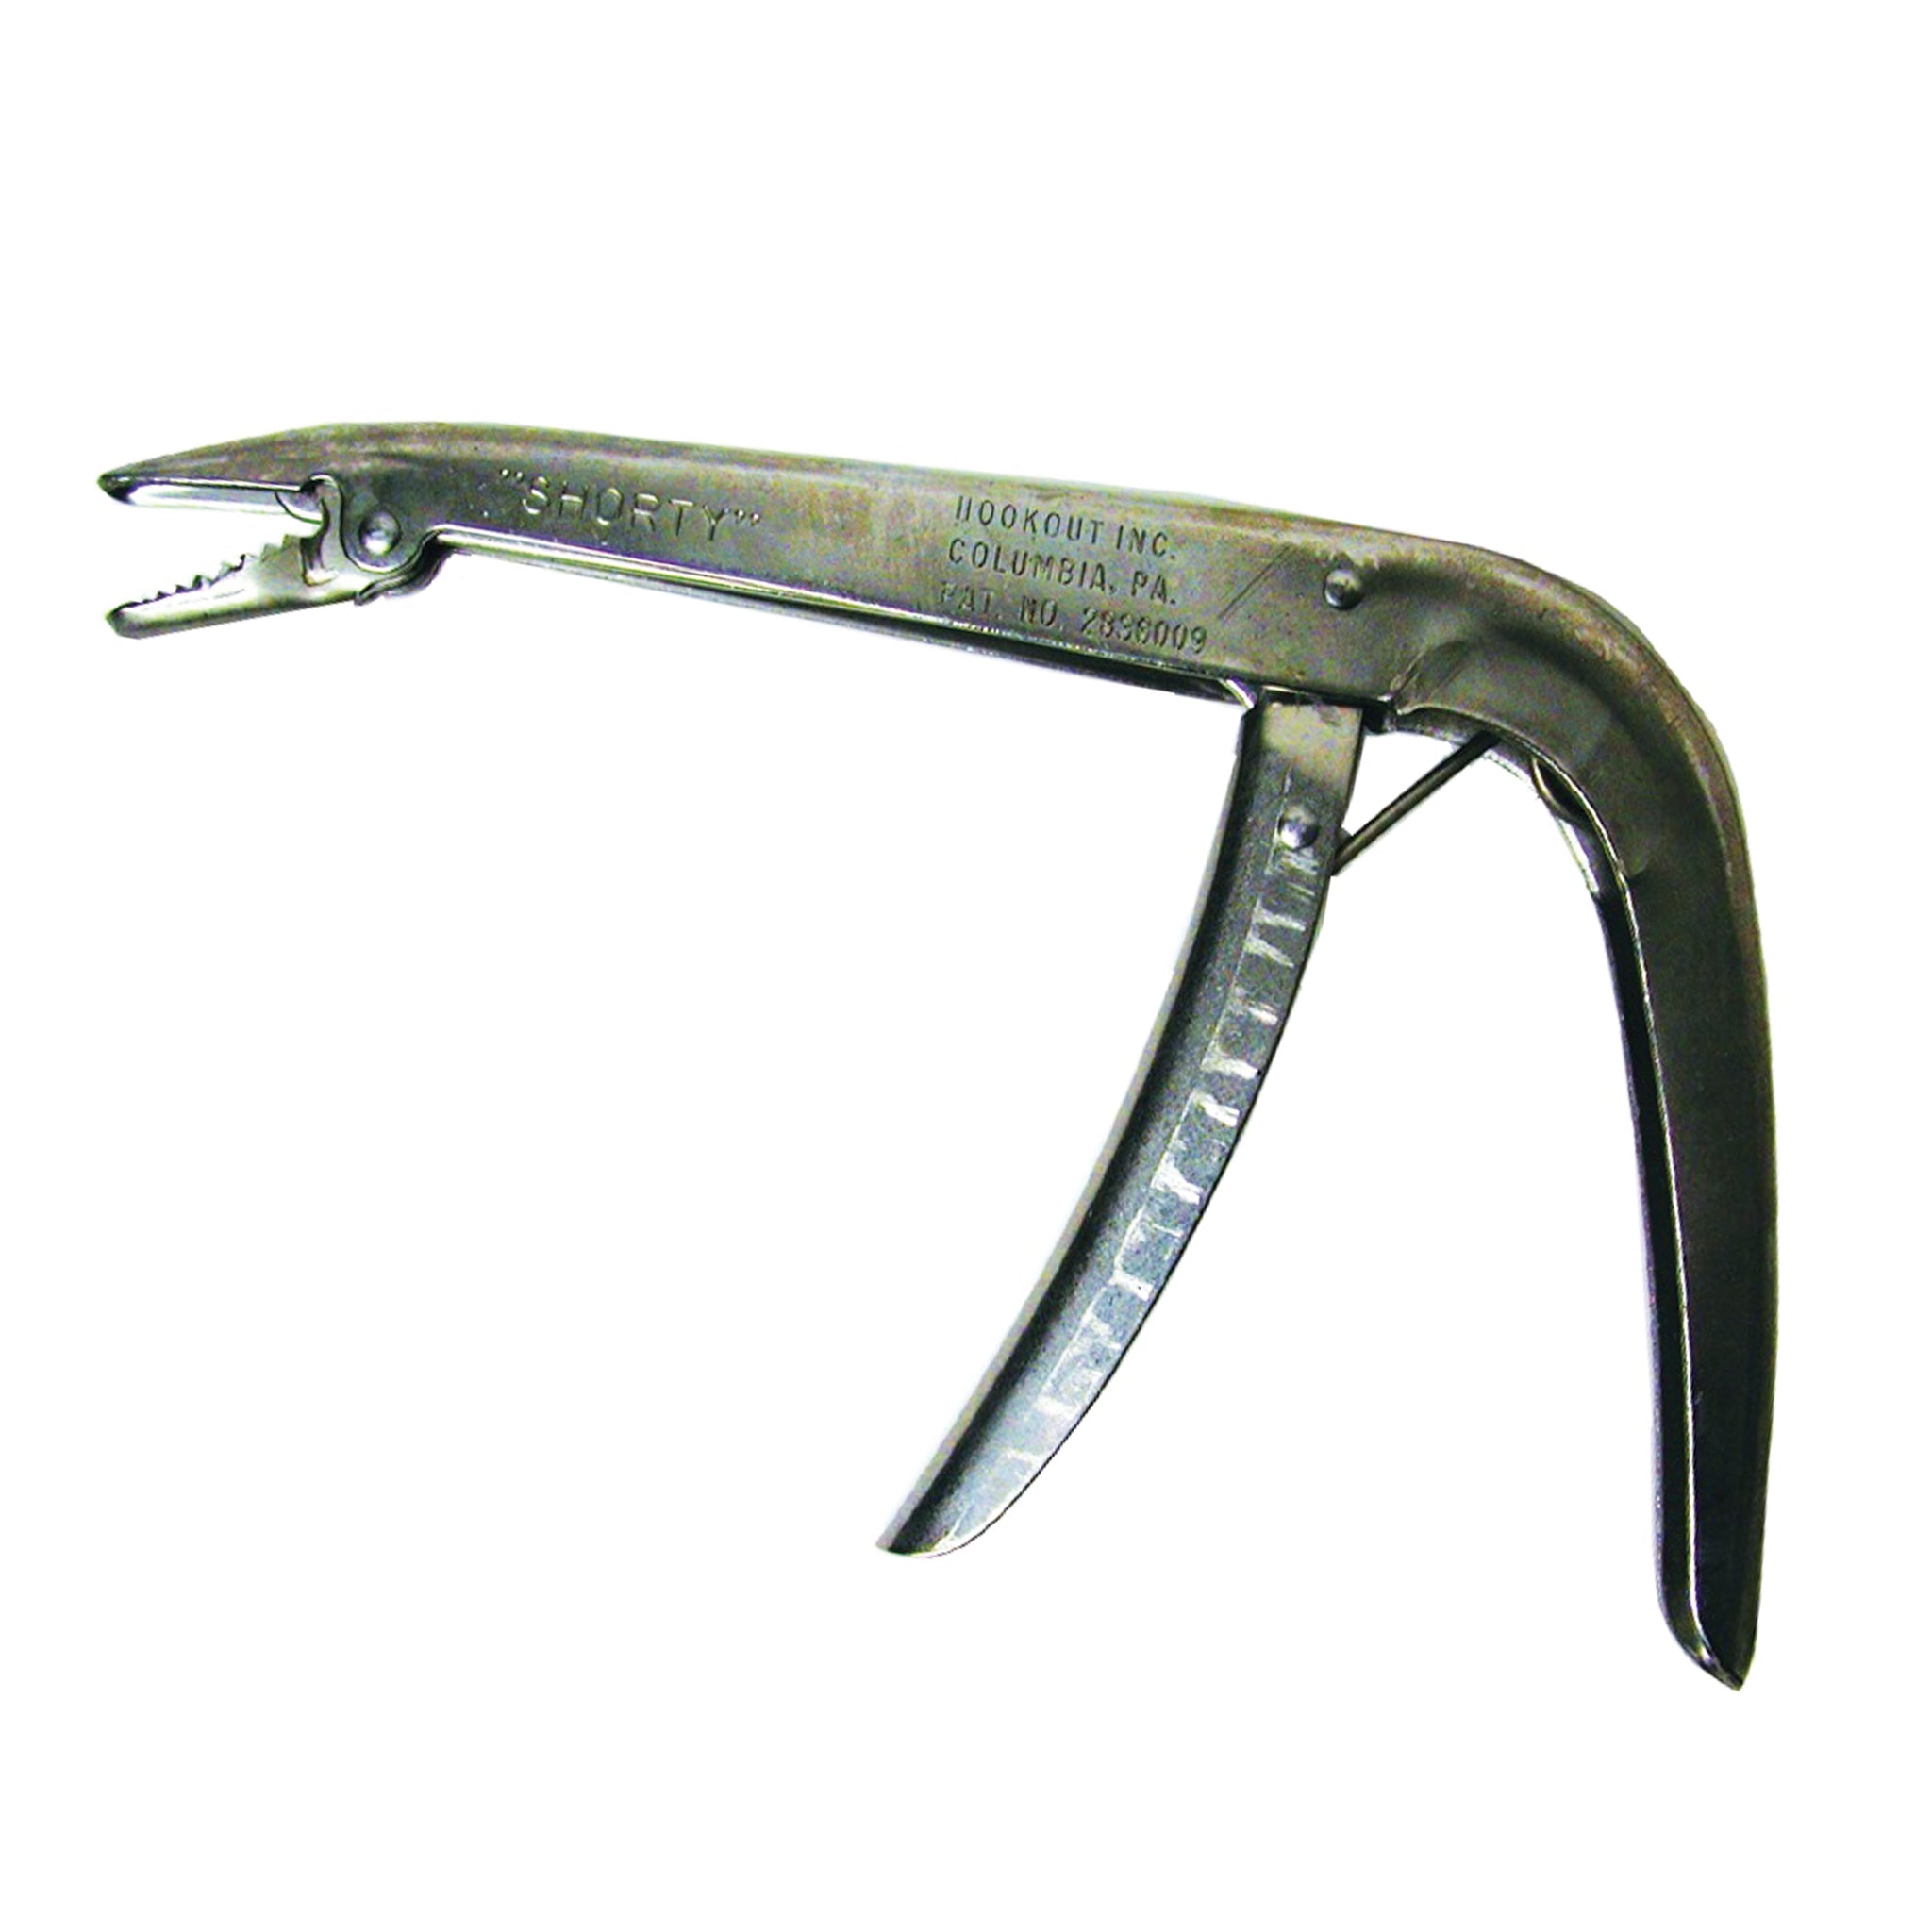 Baker Hook-Out Stainless Steel Hook Remover